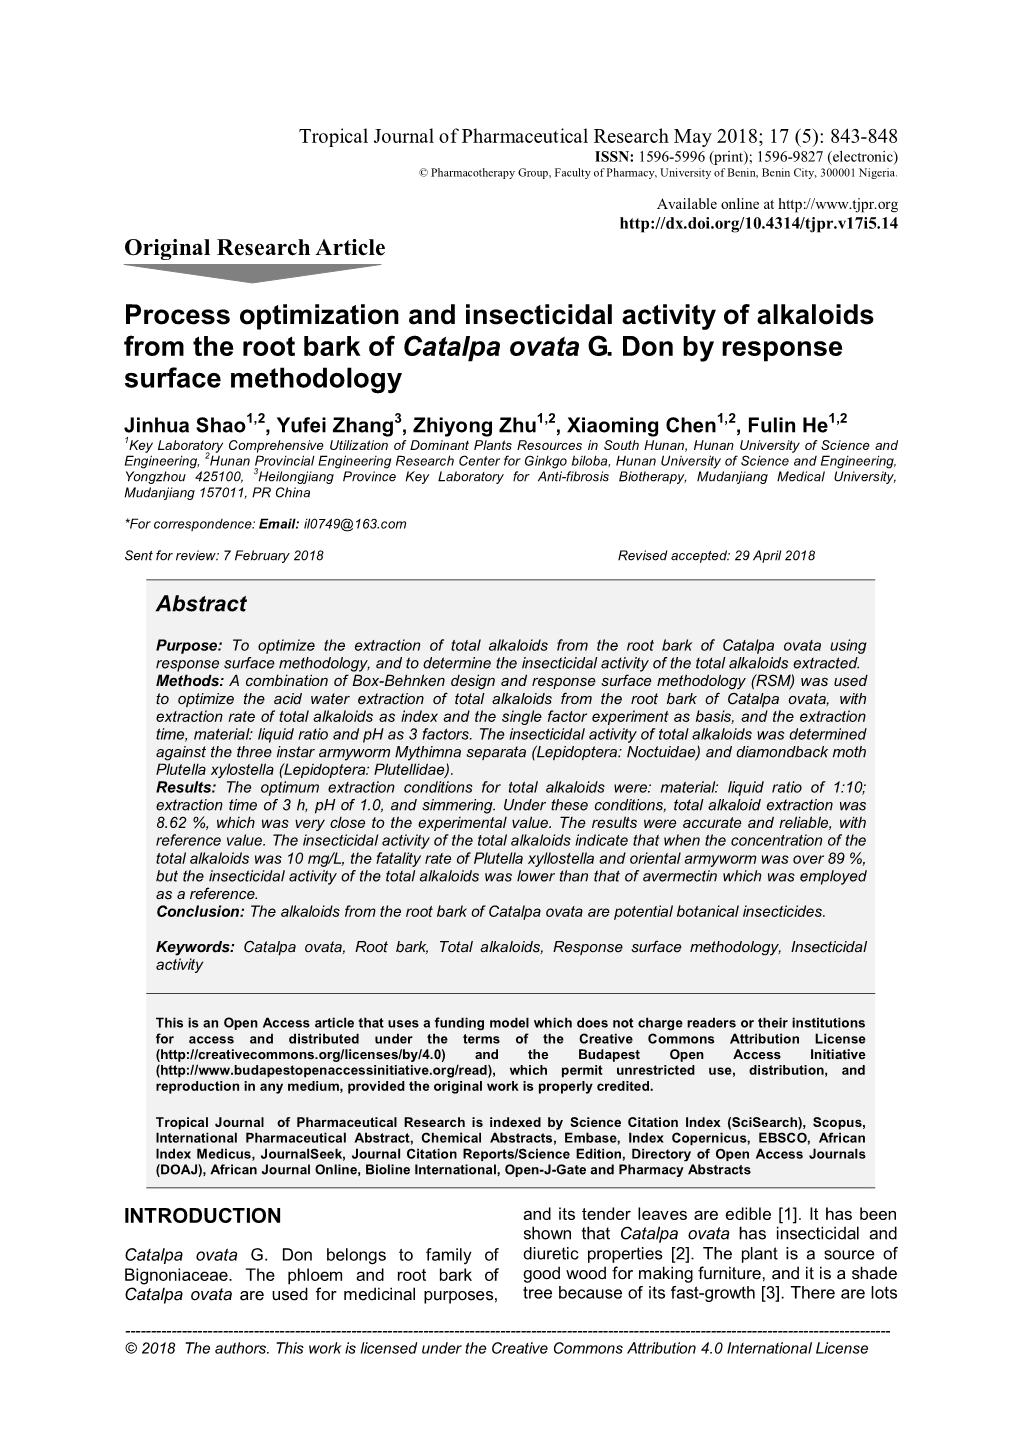 Process Optimization and Insecticidal Activity of Alkaloids from the Root Bark of Catalpa Ovata G